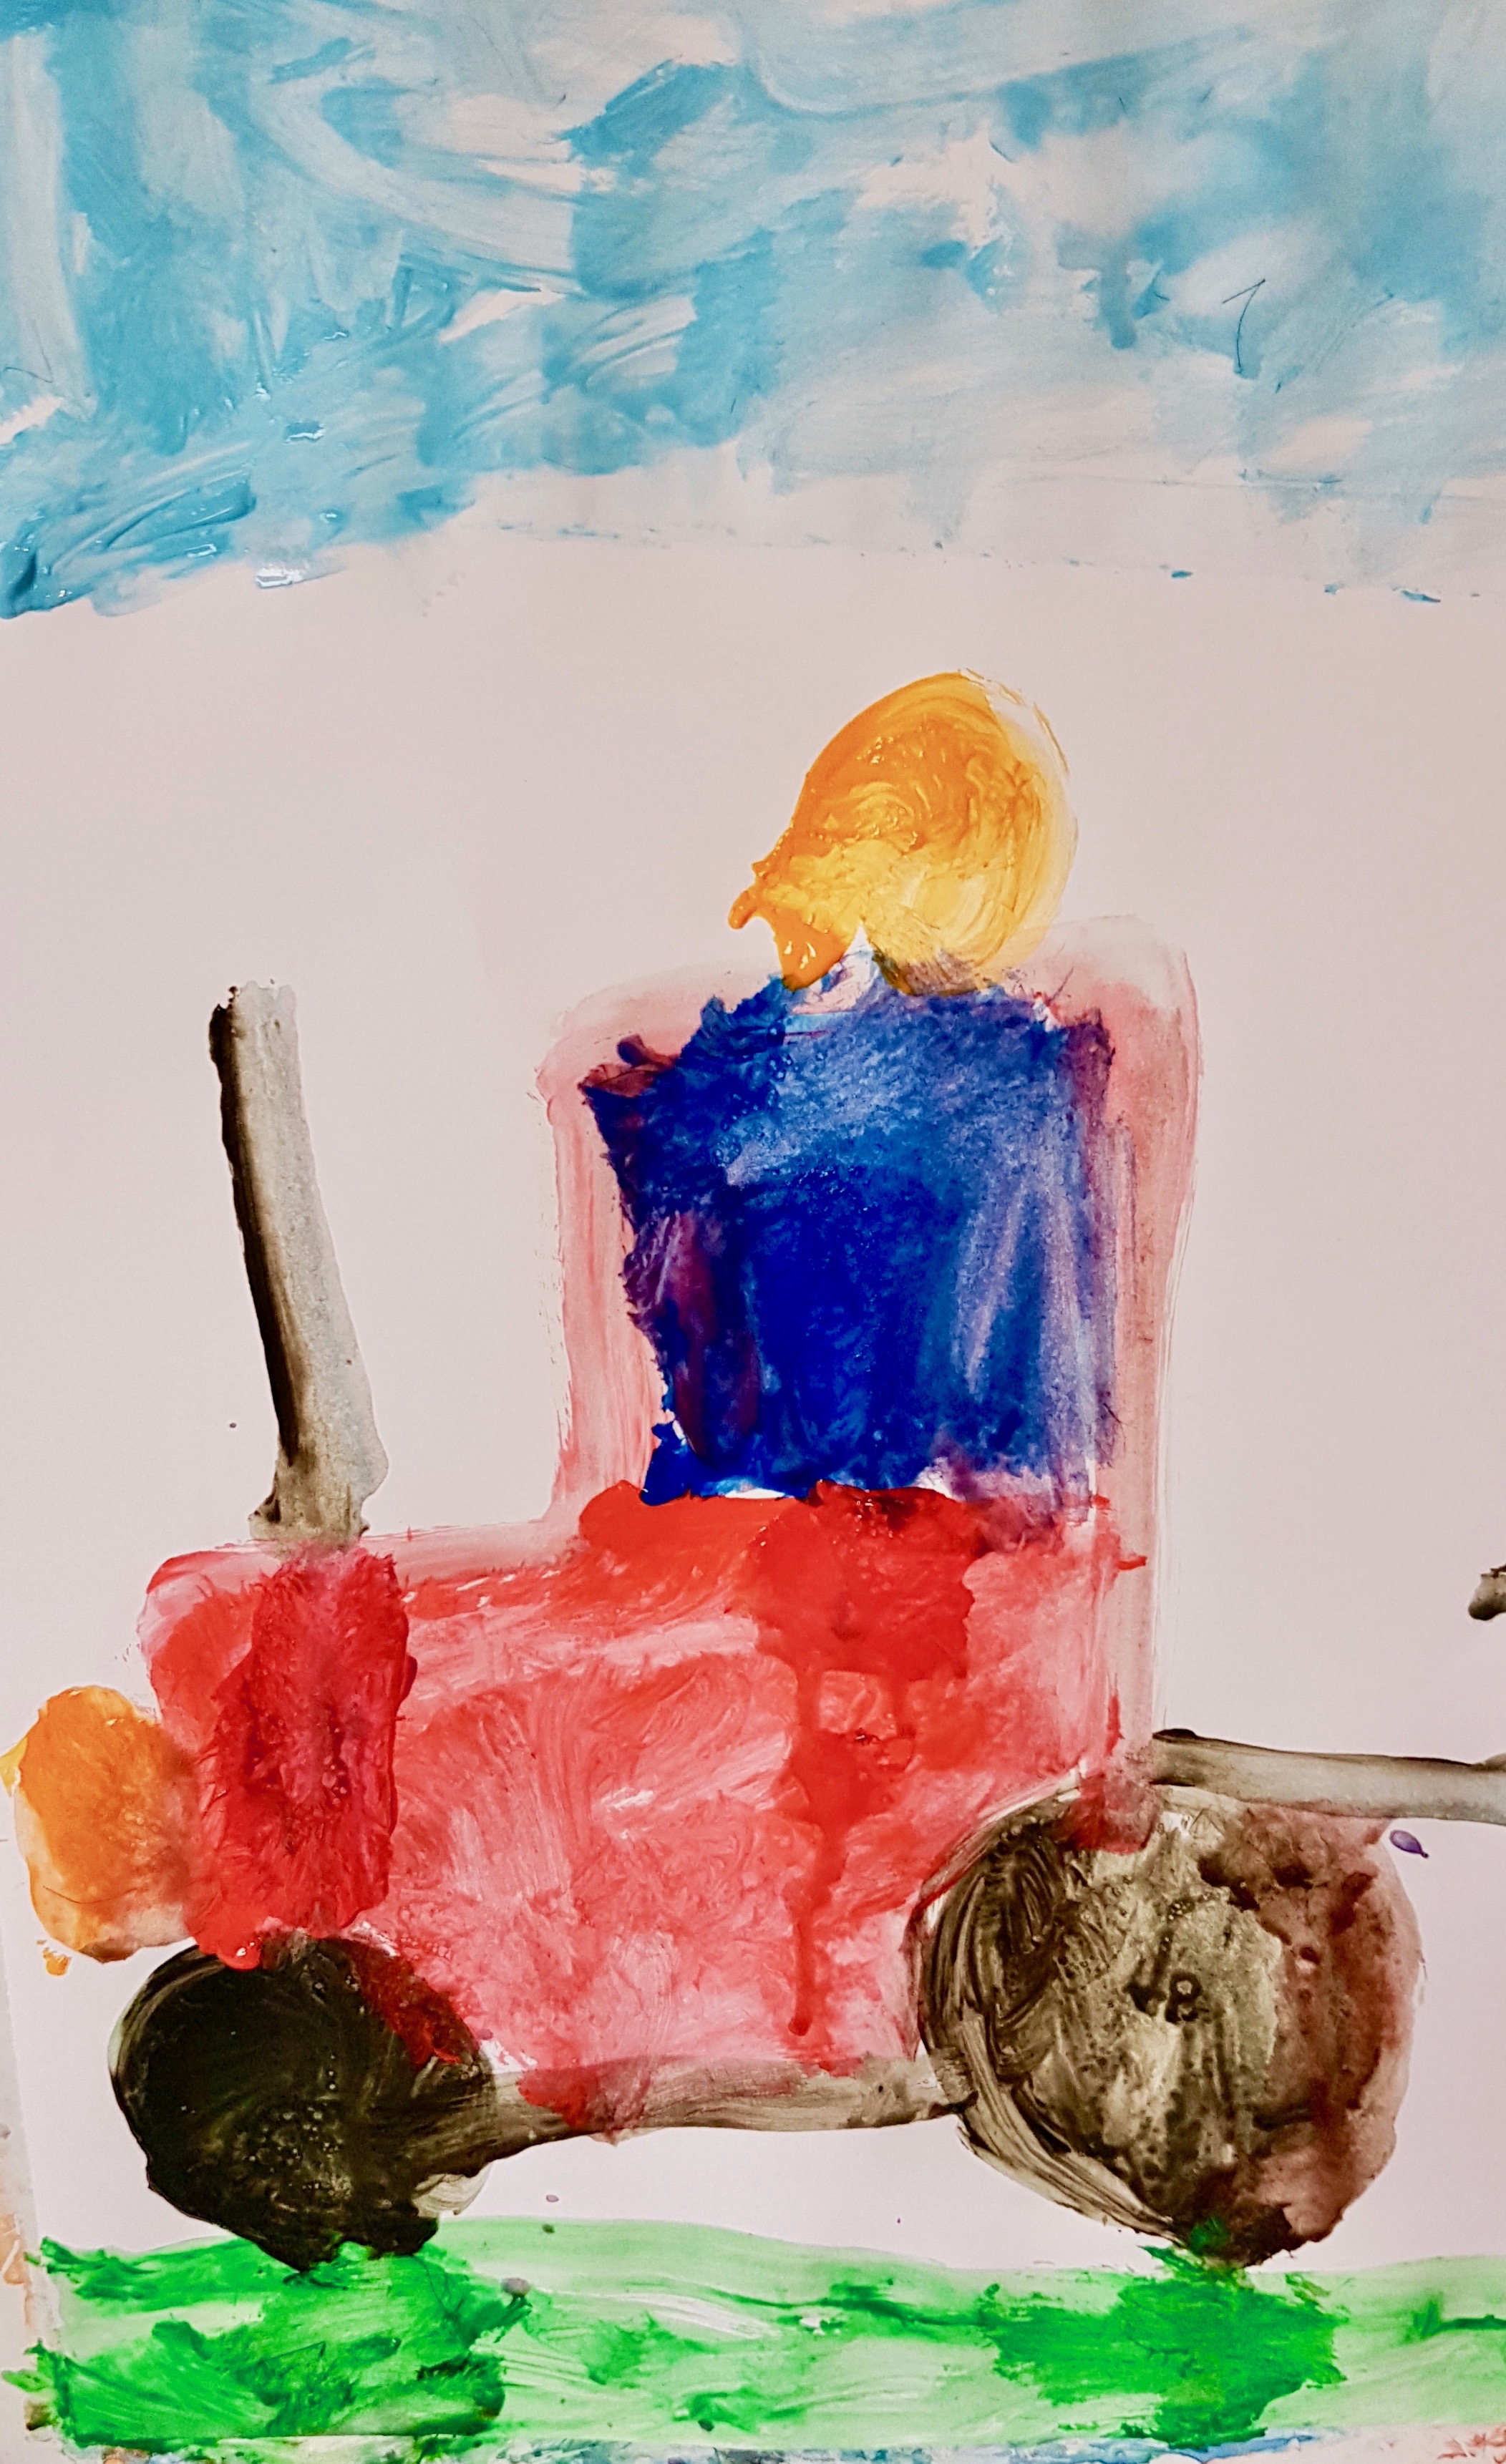 'Massey' by Rían (5) from Galway